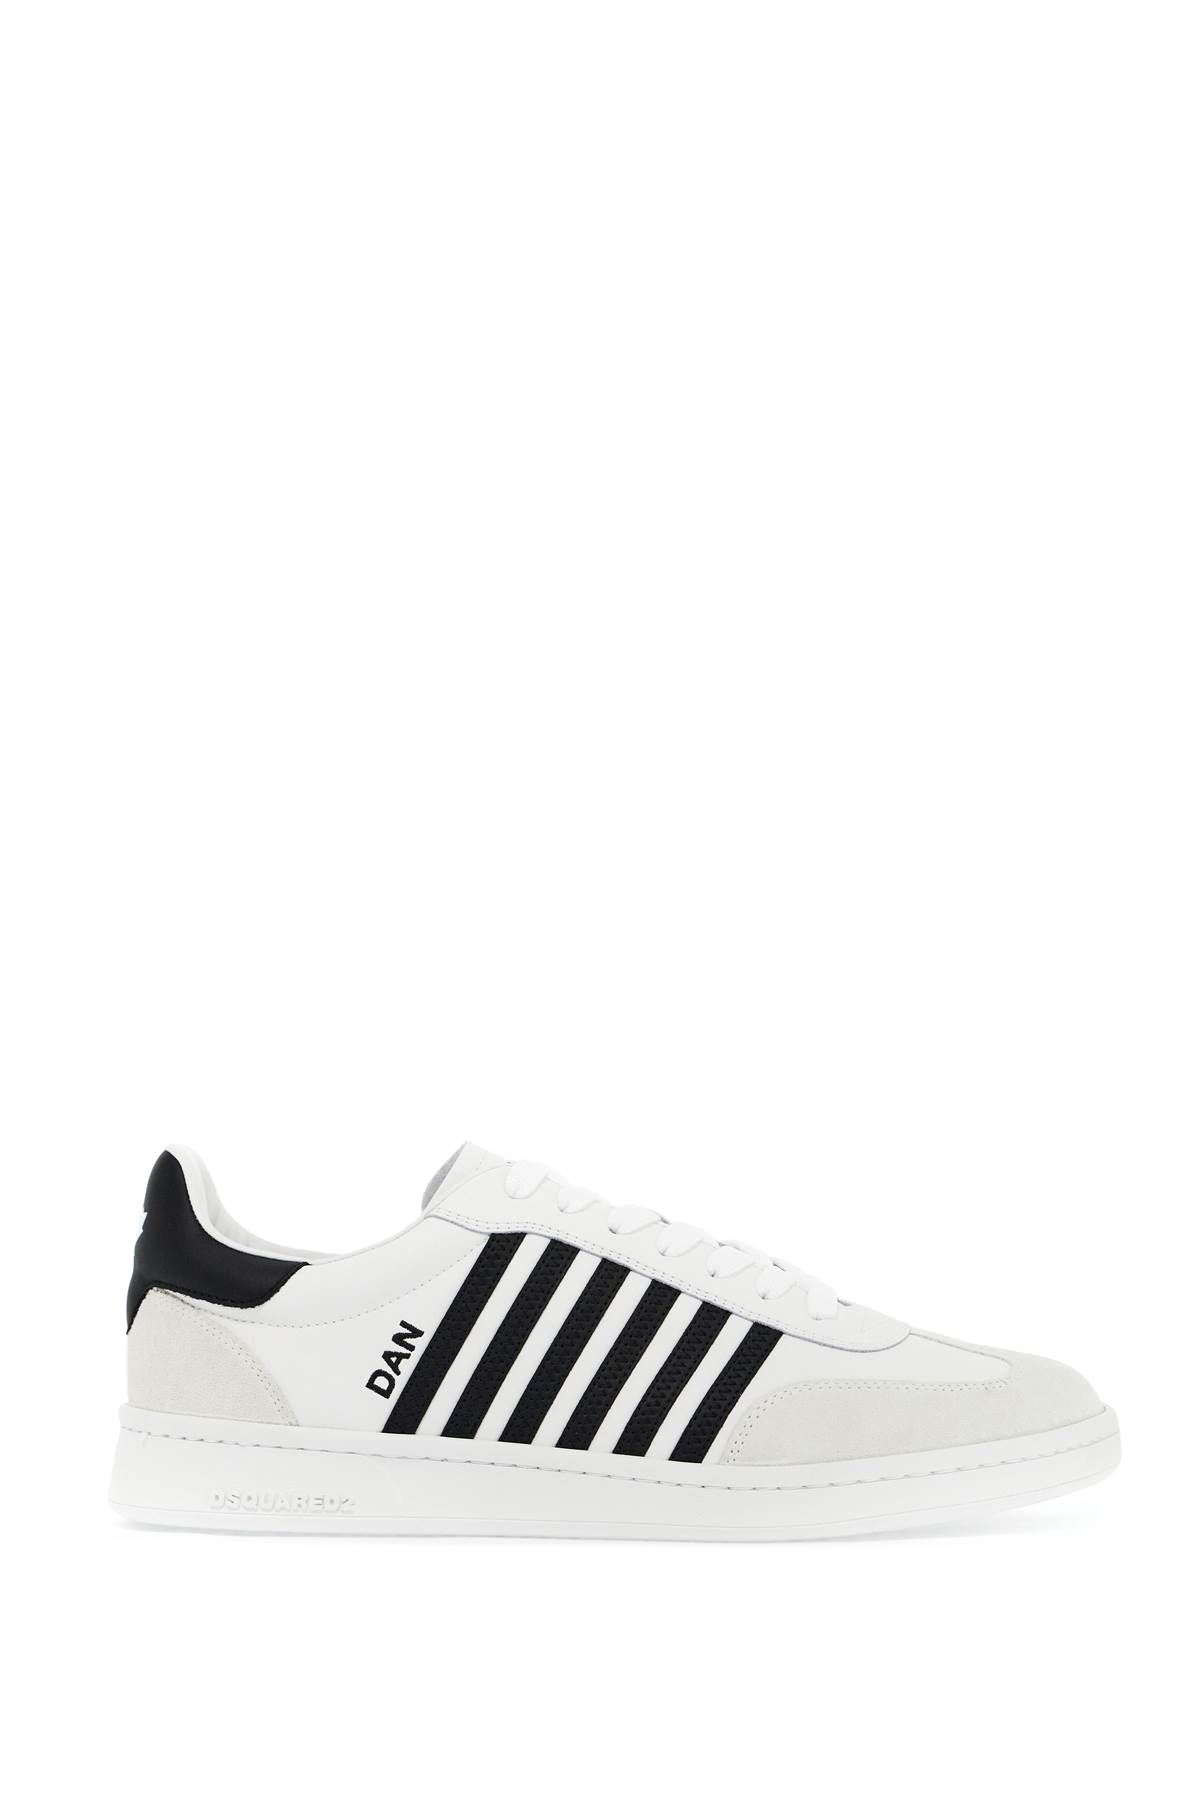 Dsquared2 DSQUARED2 boxer sneakers